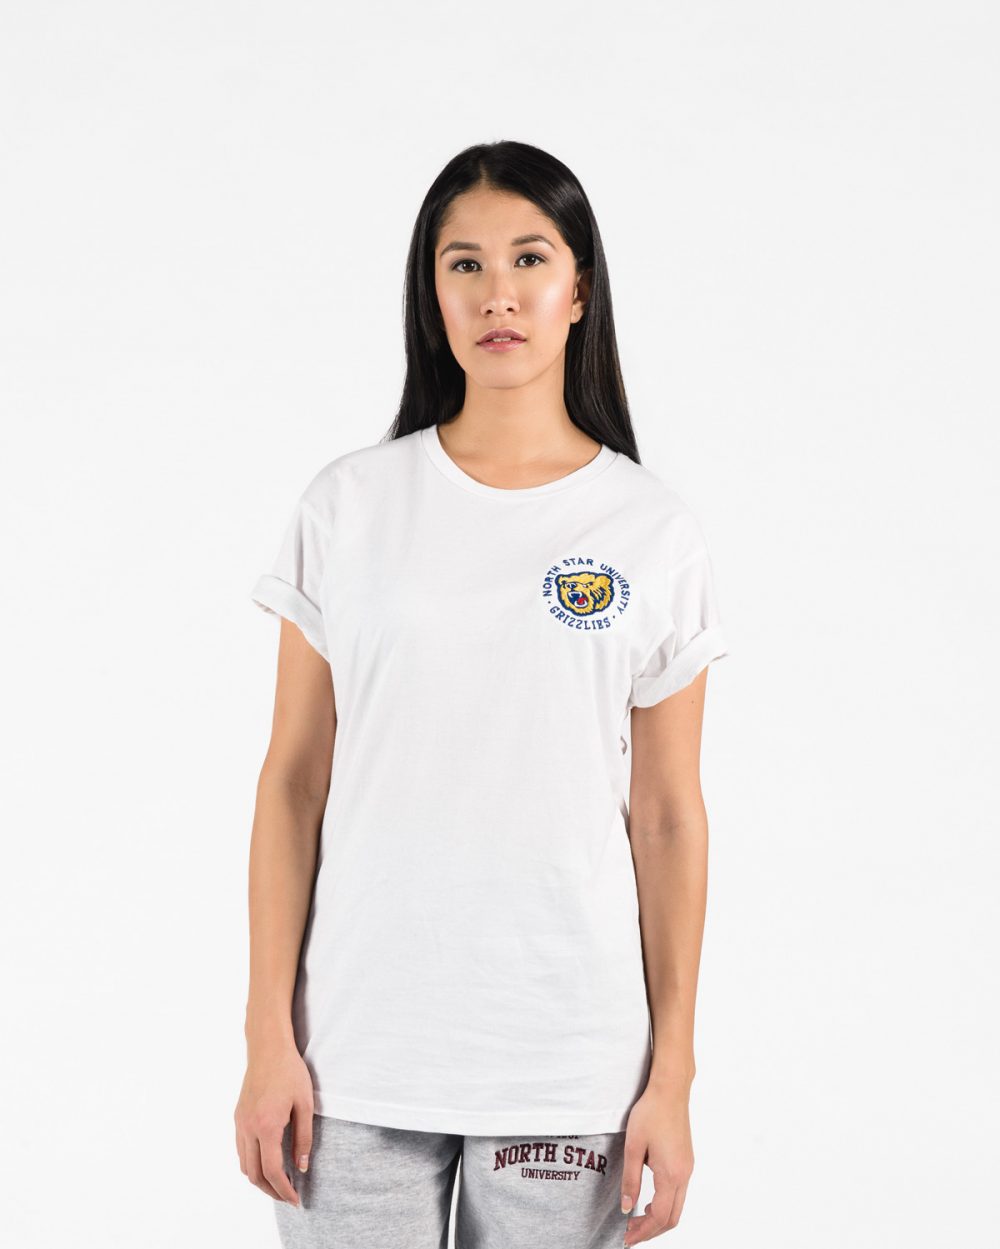 Premium T-Shirt 102 in white on woman